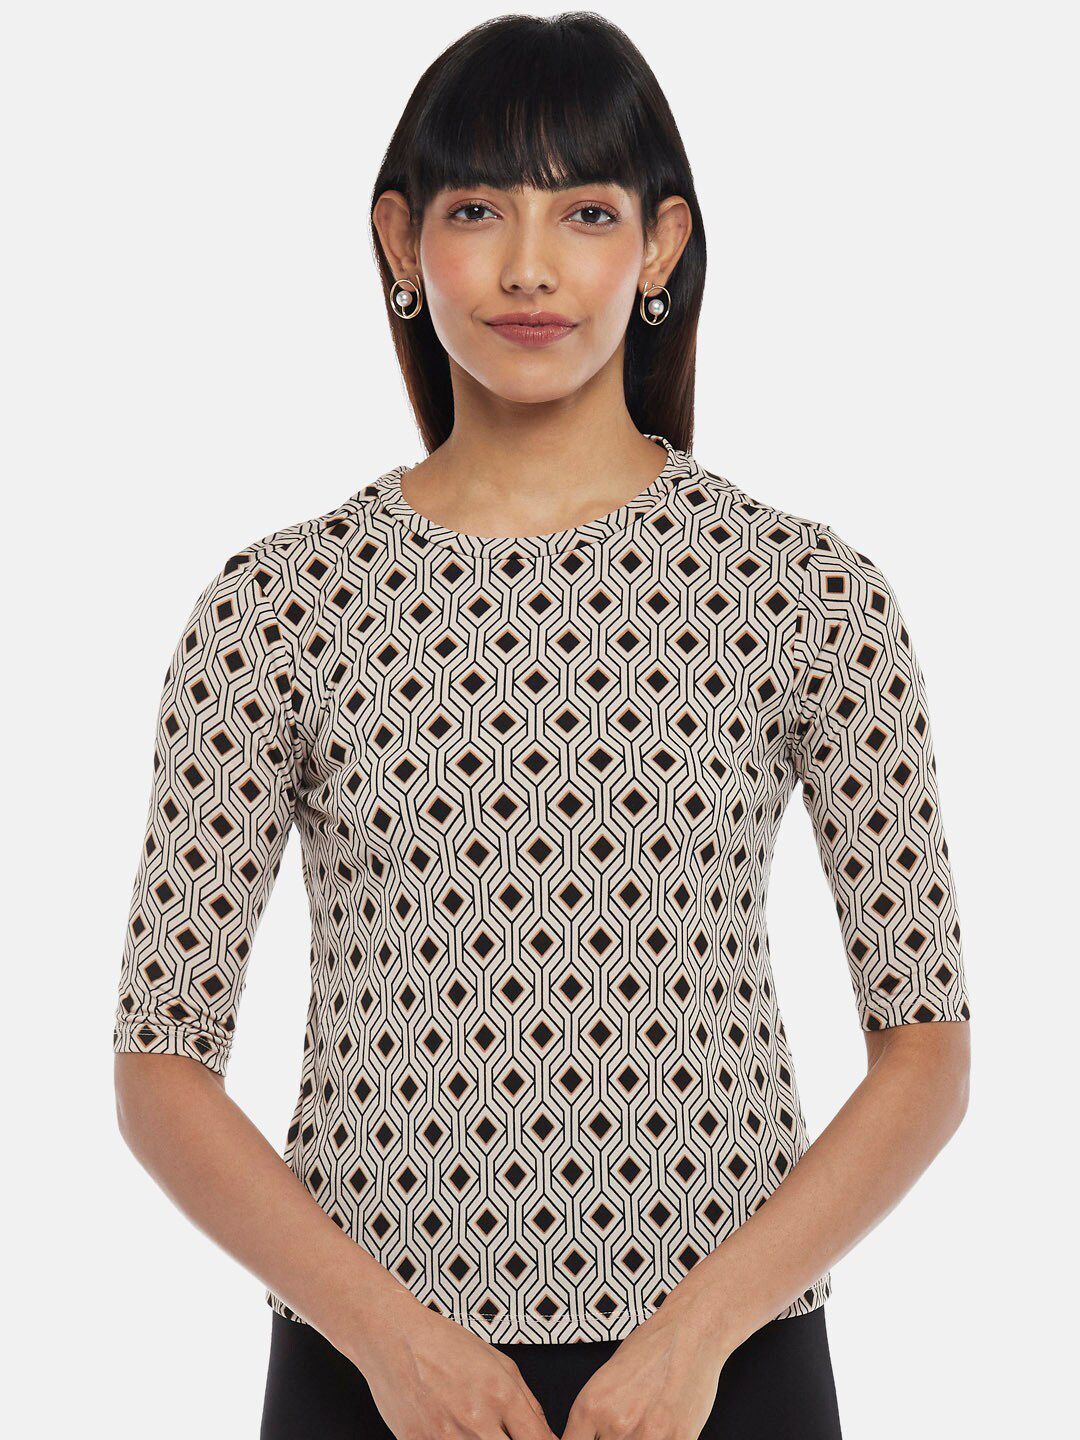 Annabelle by Pantaloons Women Beige Geometric Print Top Price in India